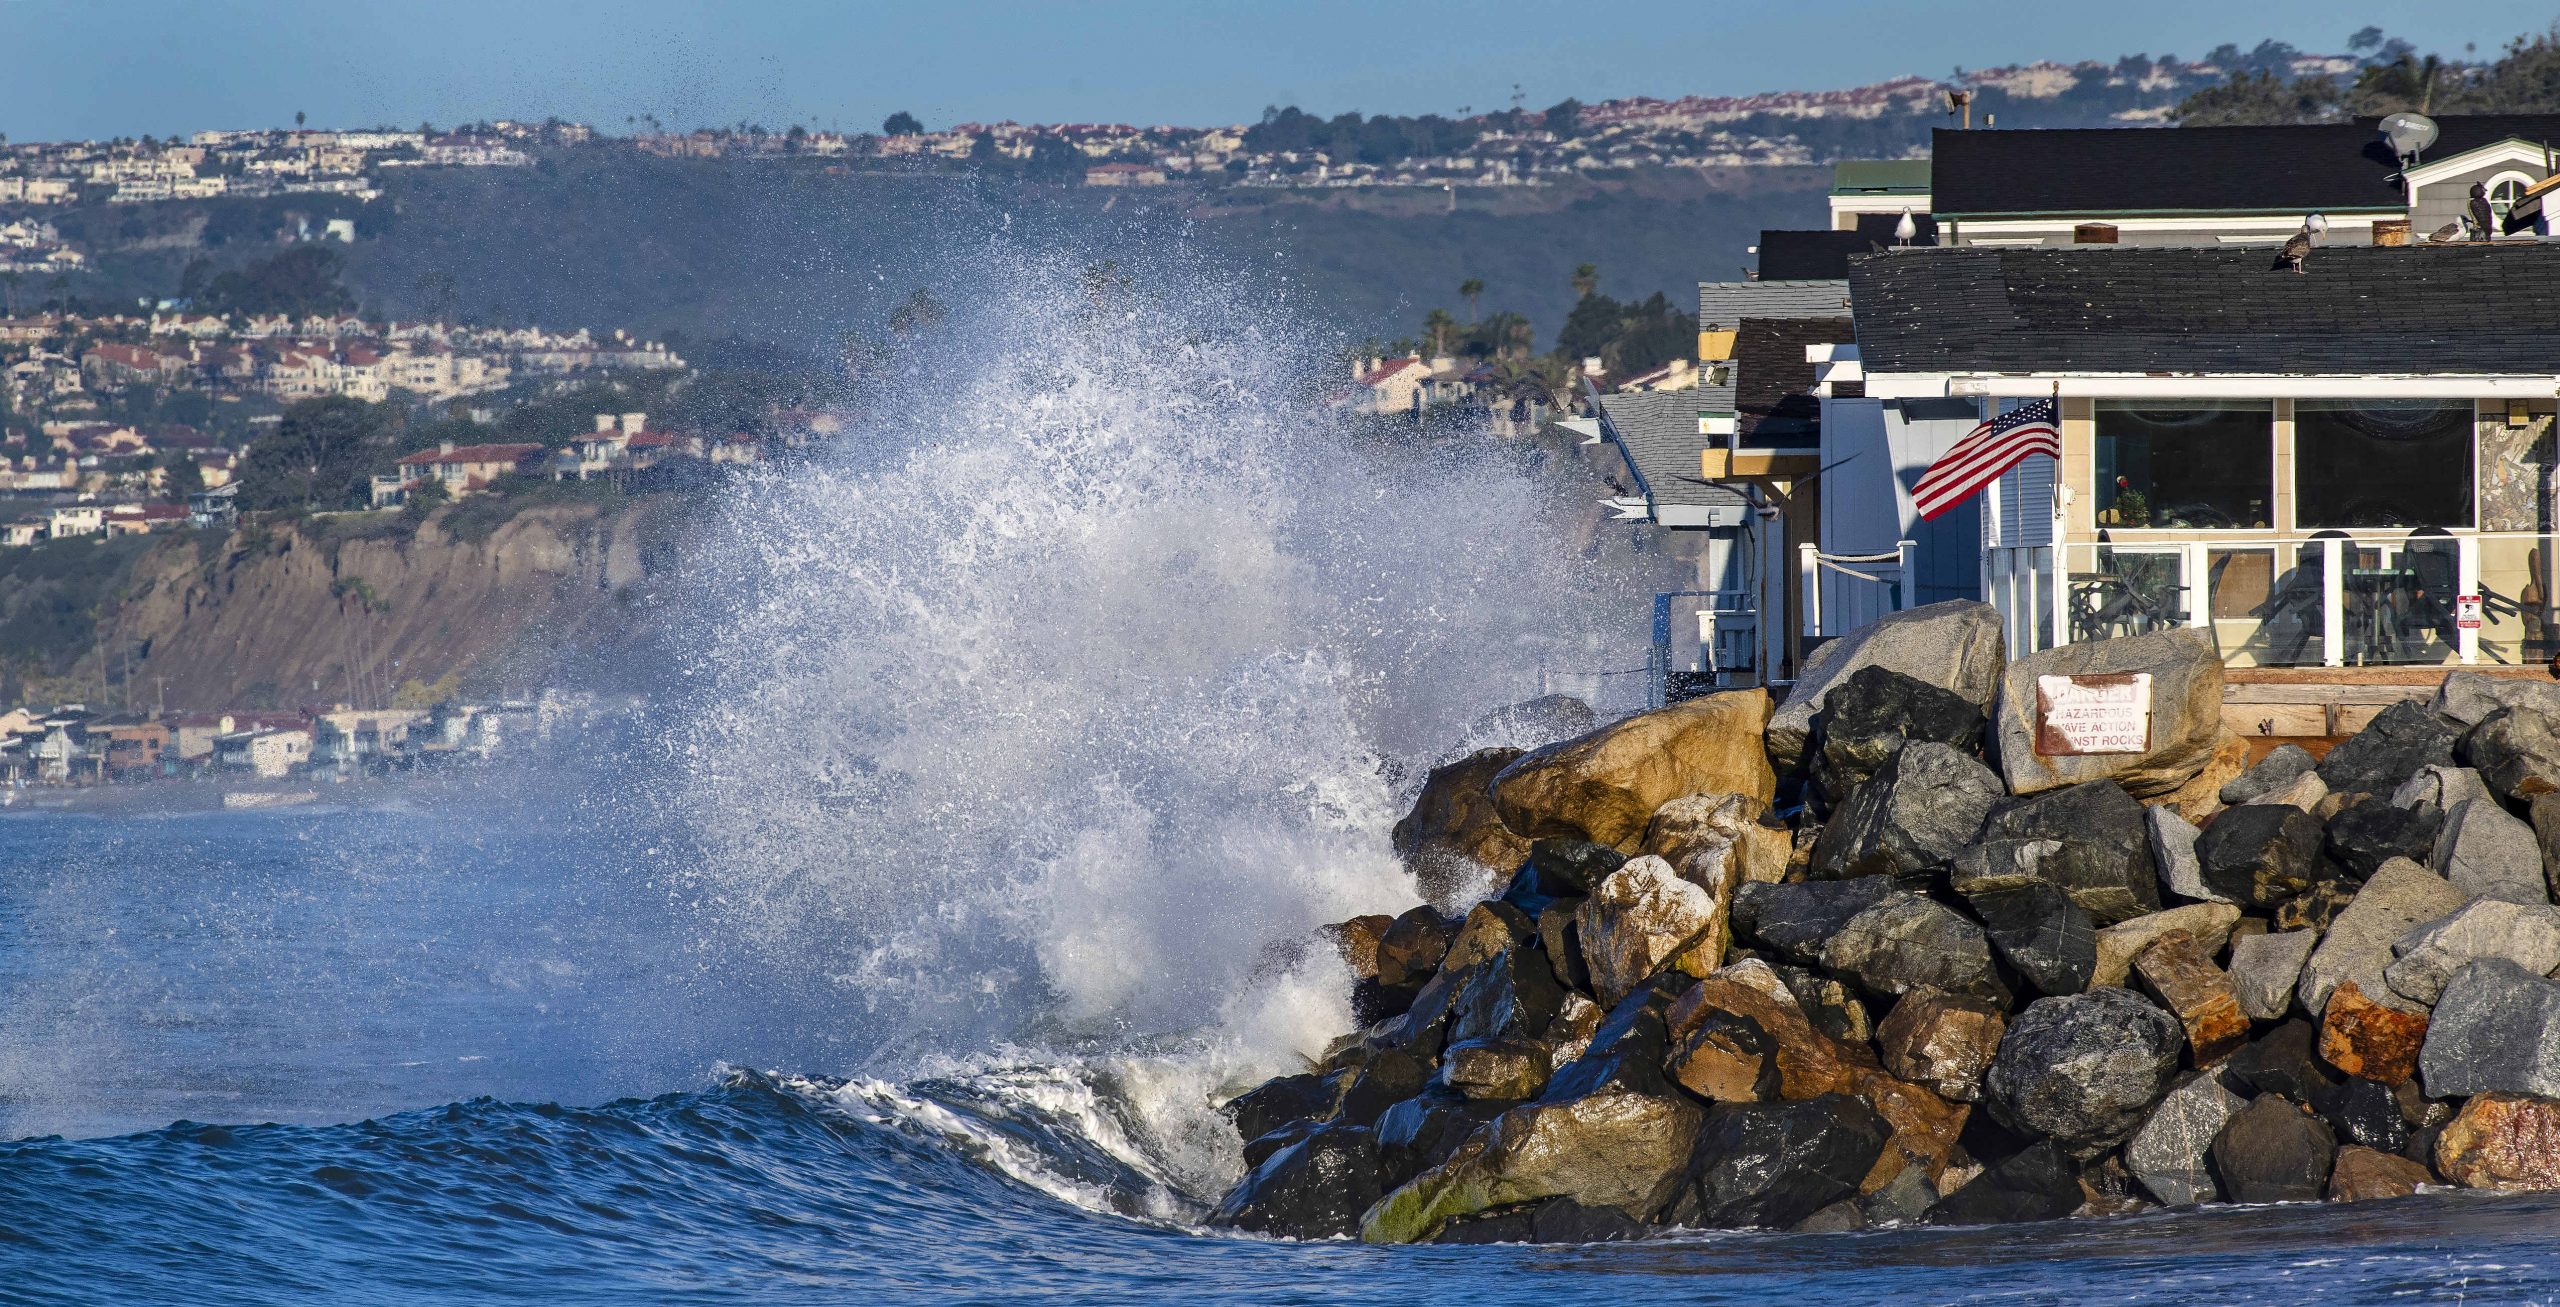 King tides threaten roads and cover beaches in preview of sea level